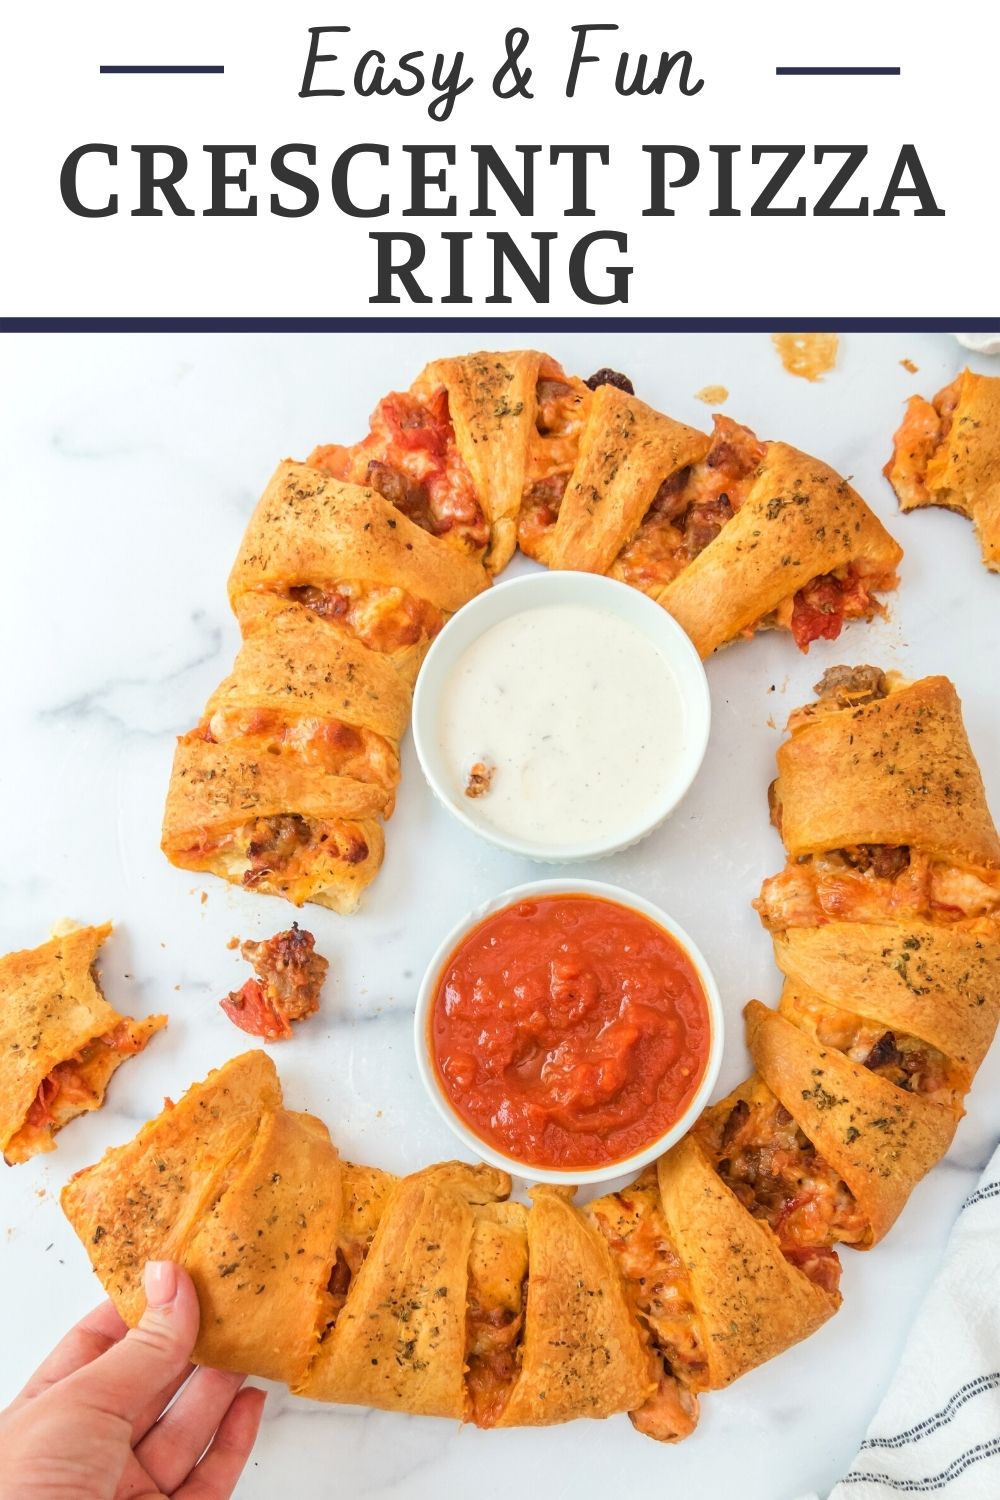 Make pizza night even more fun with this pizza crescent ring. It is quick and easy to make and tastes amazing.